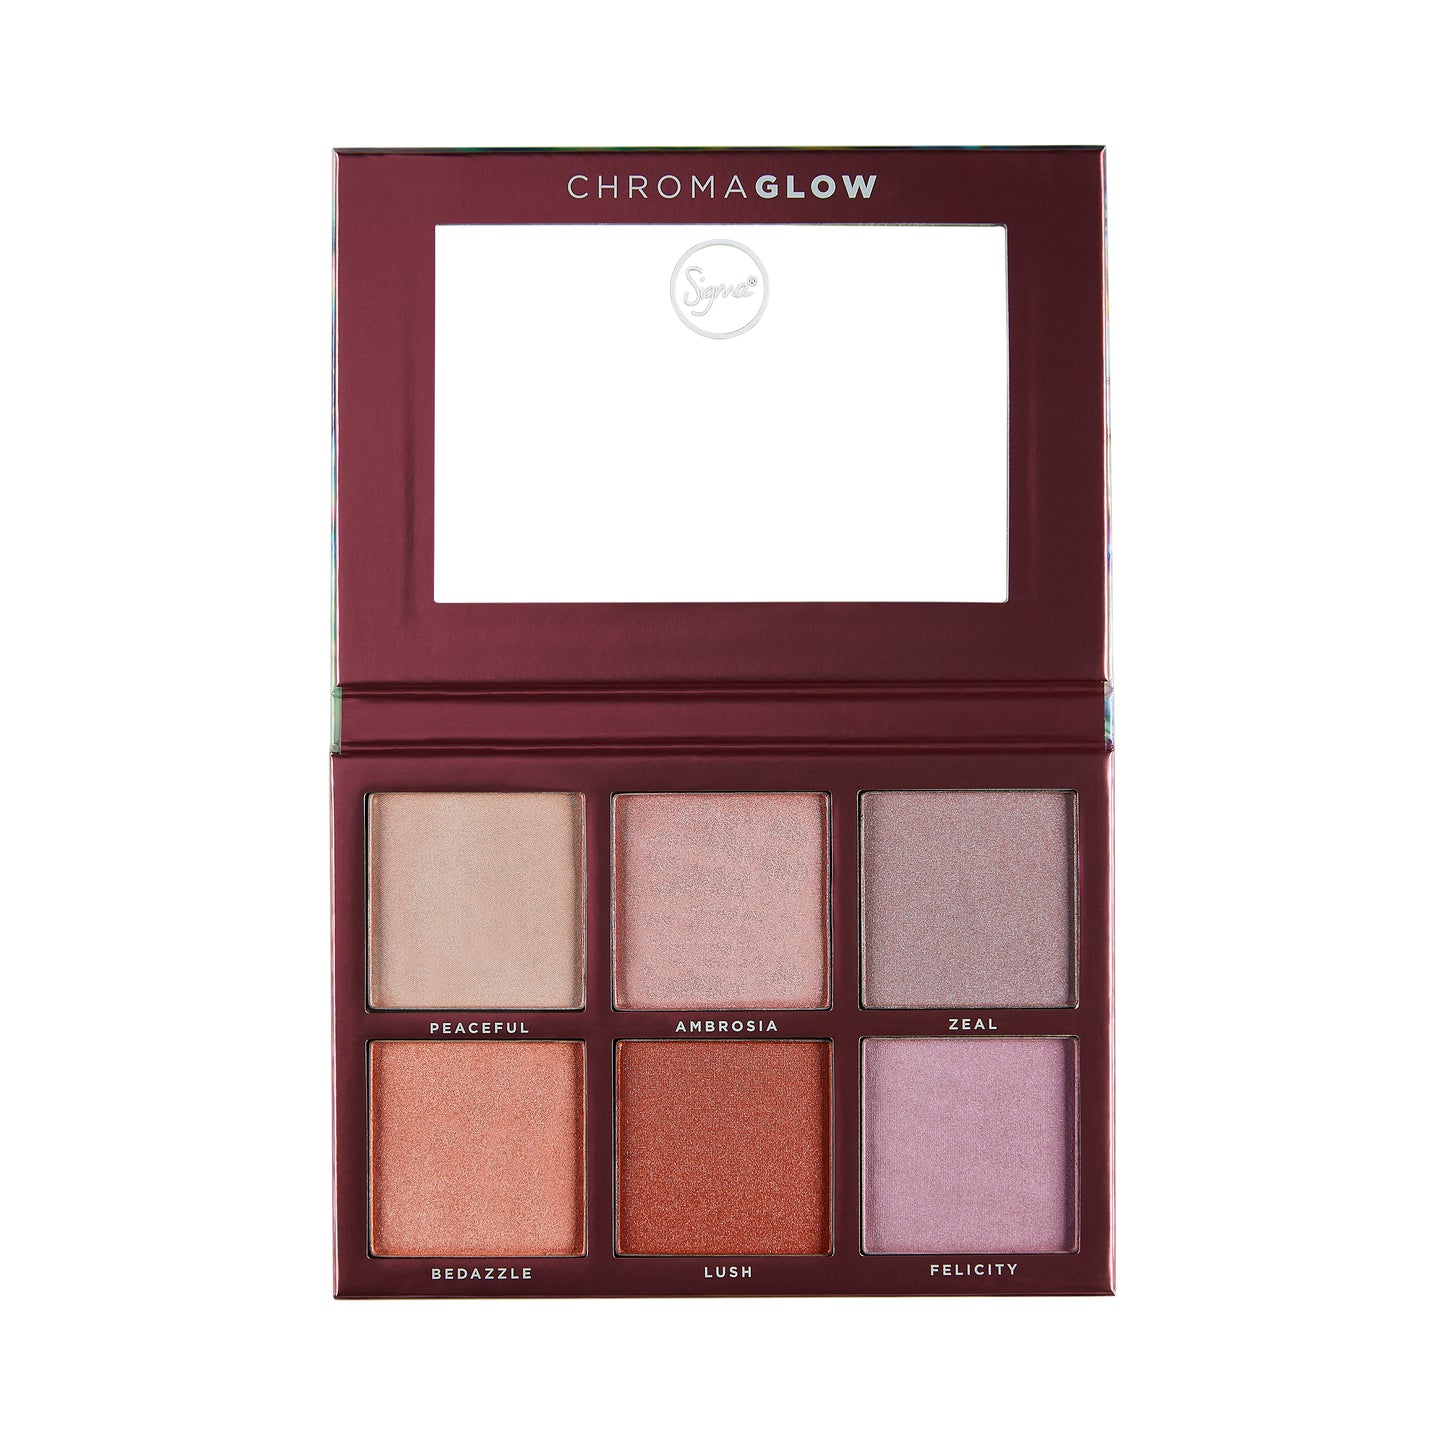 Sigma Beauty Chroma Glow Shimmer and Highlight Palette